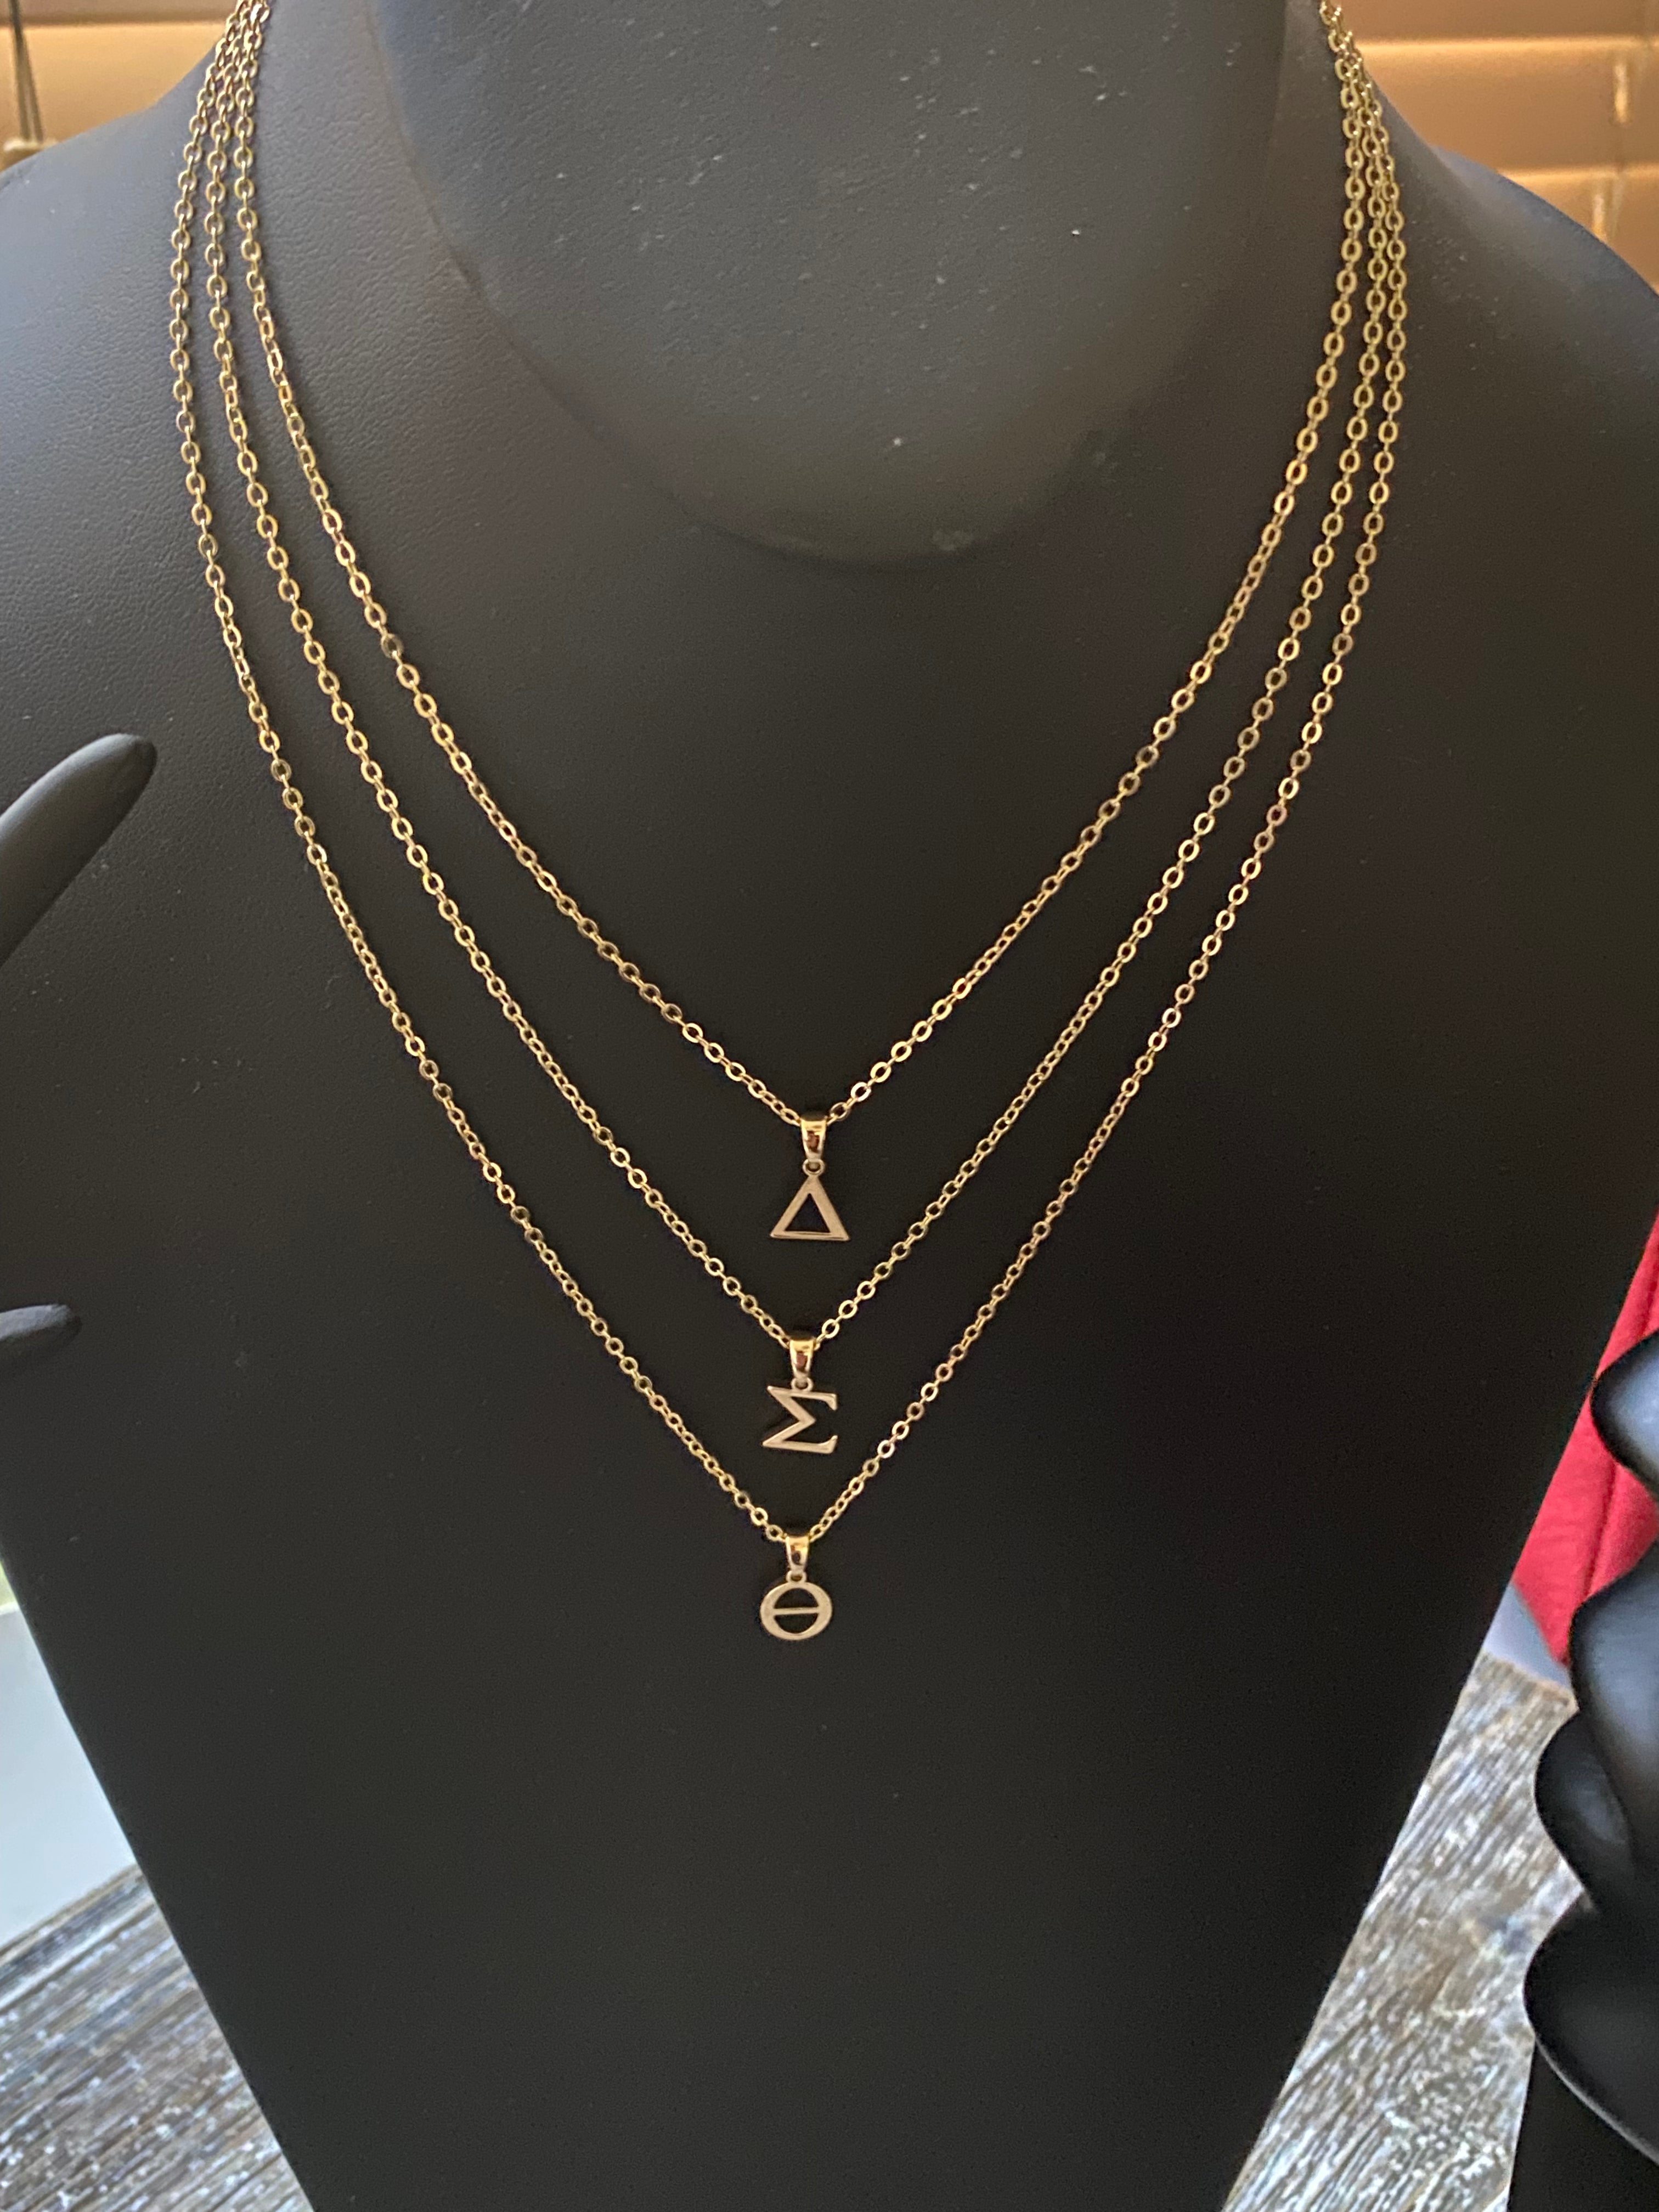 It's the DST for Me - 3 Chain Necklace